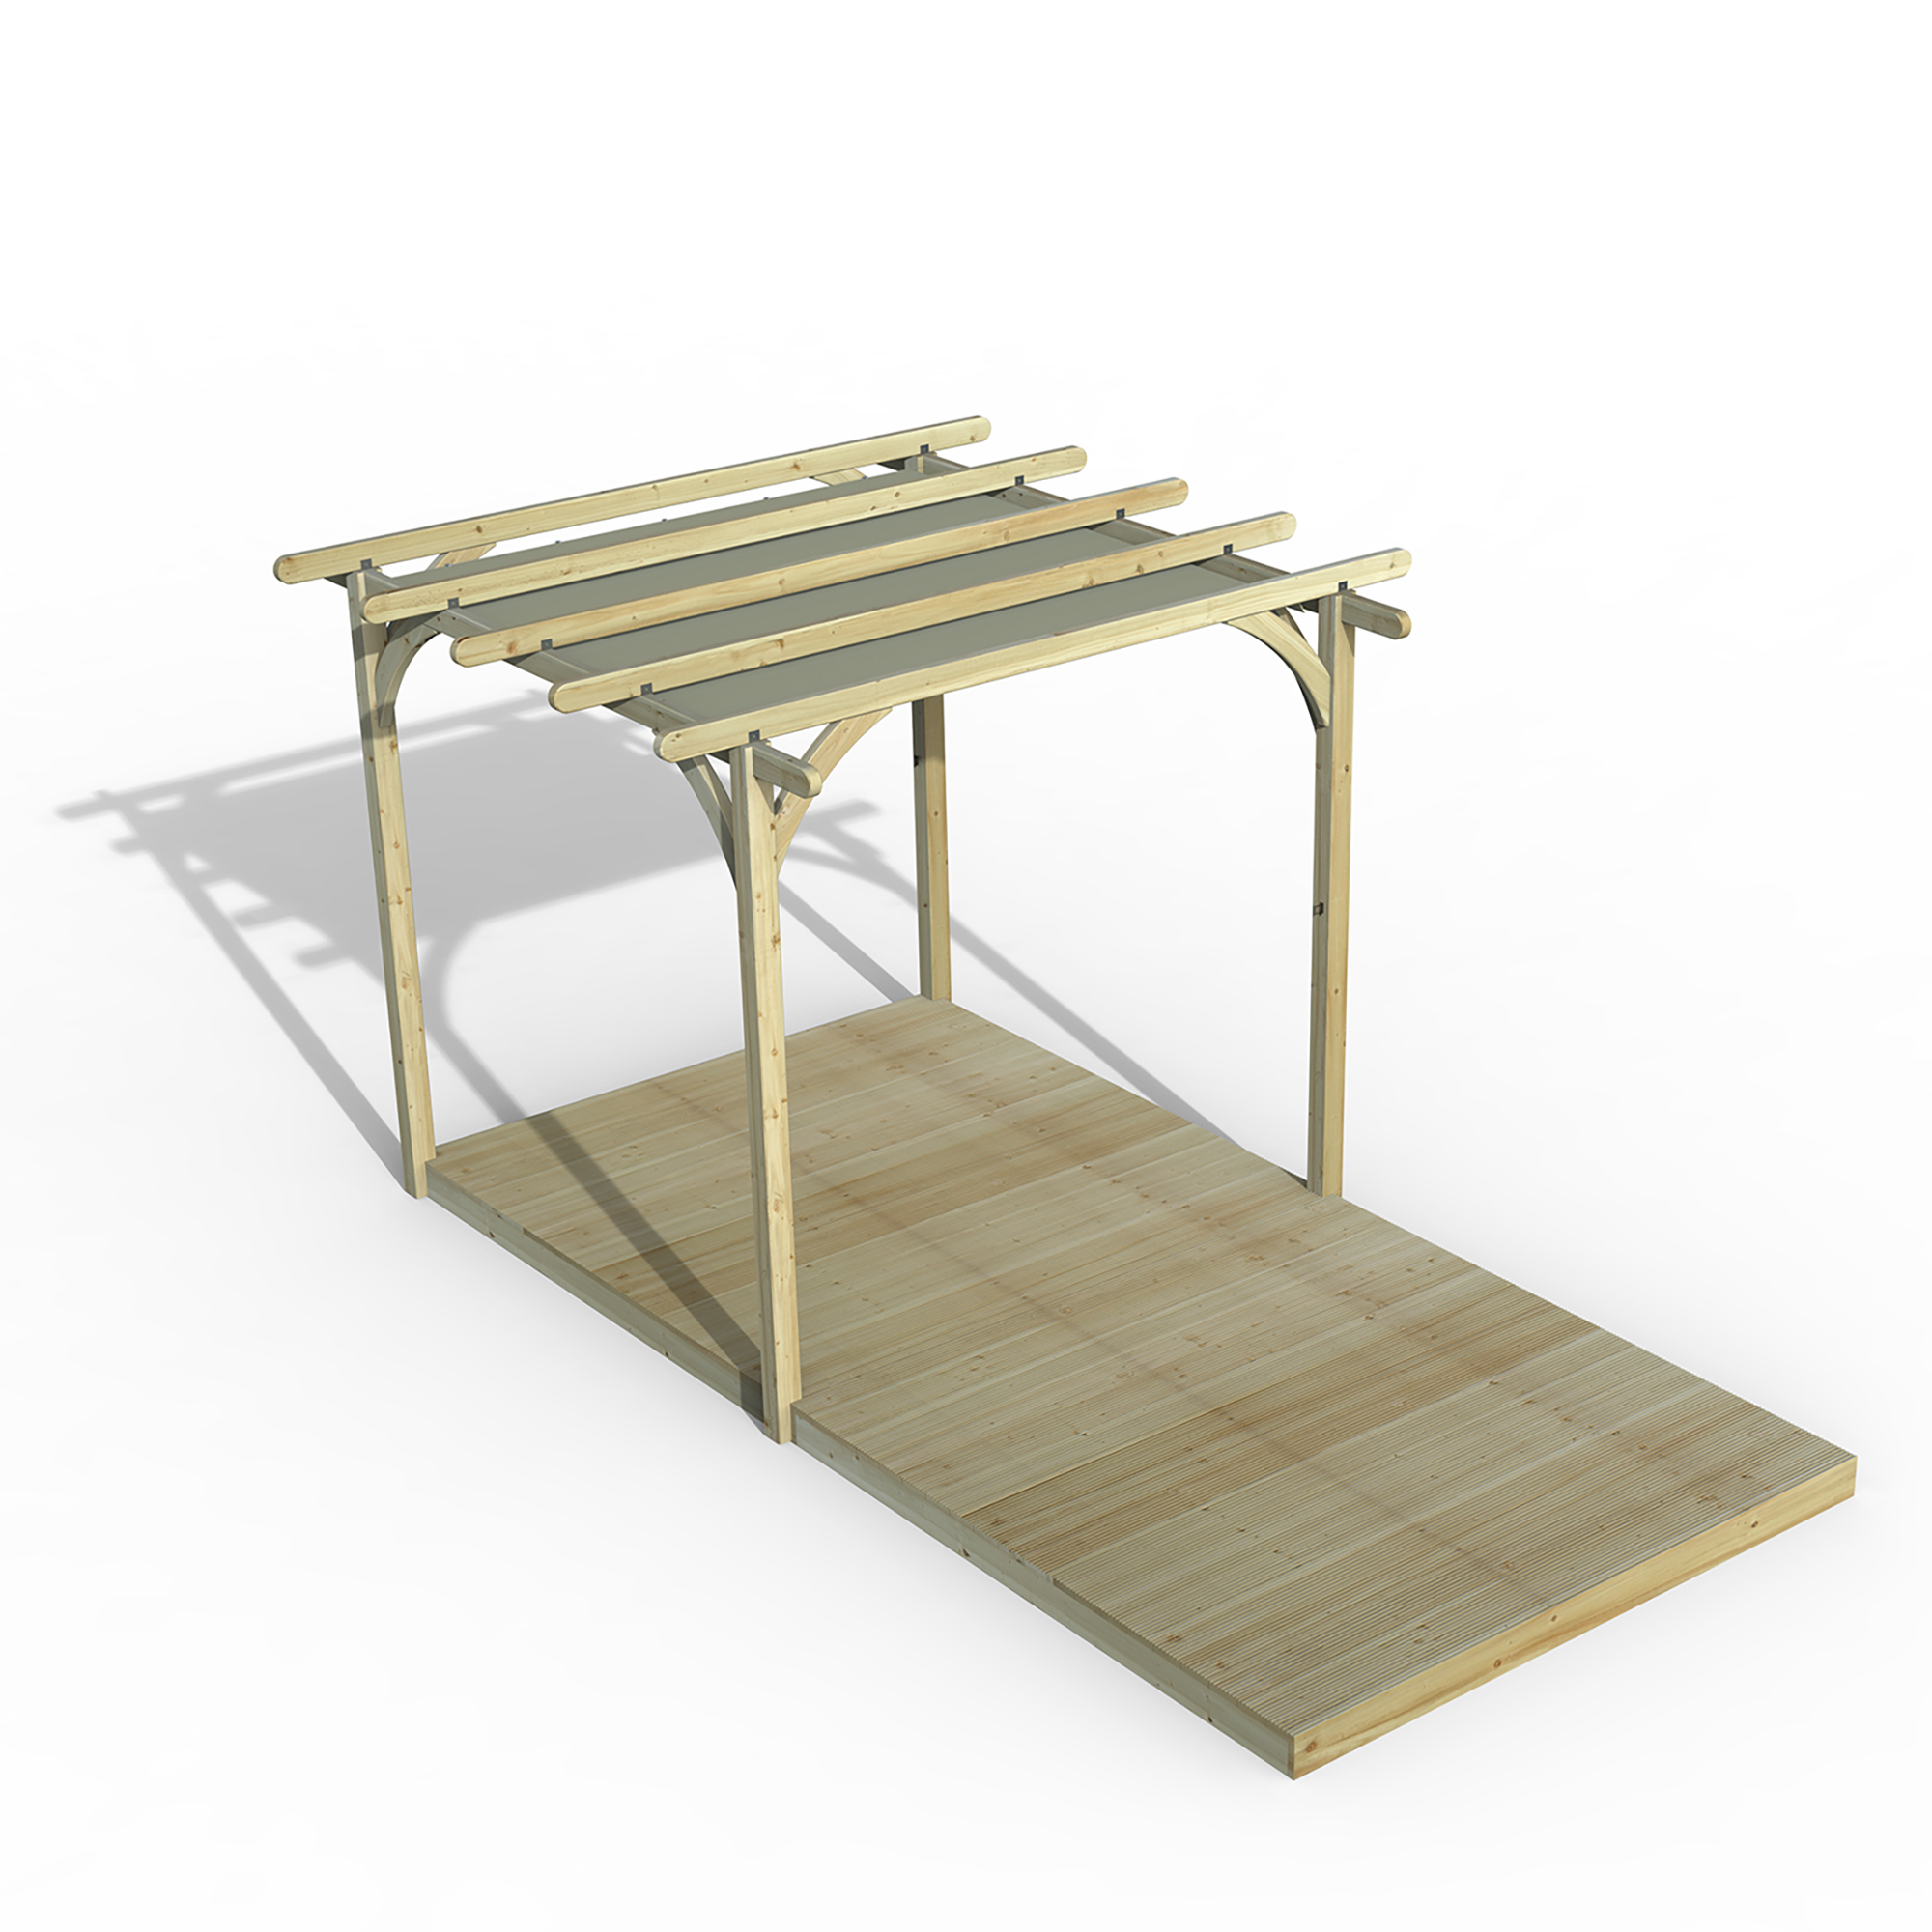 Forest Garden 2.4 x 4.8m Ultima Pergola and Decking Kit with Canopy